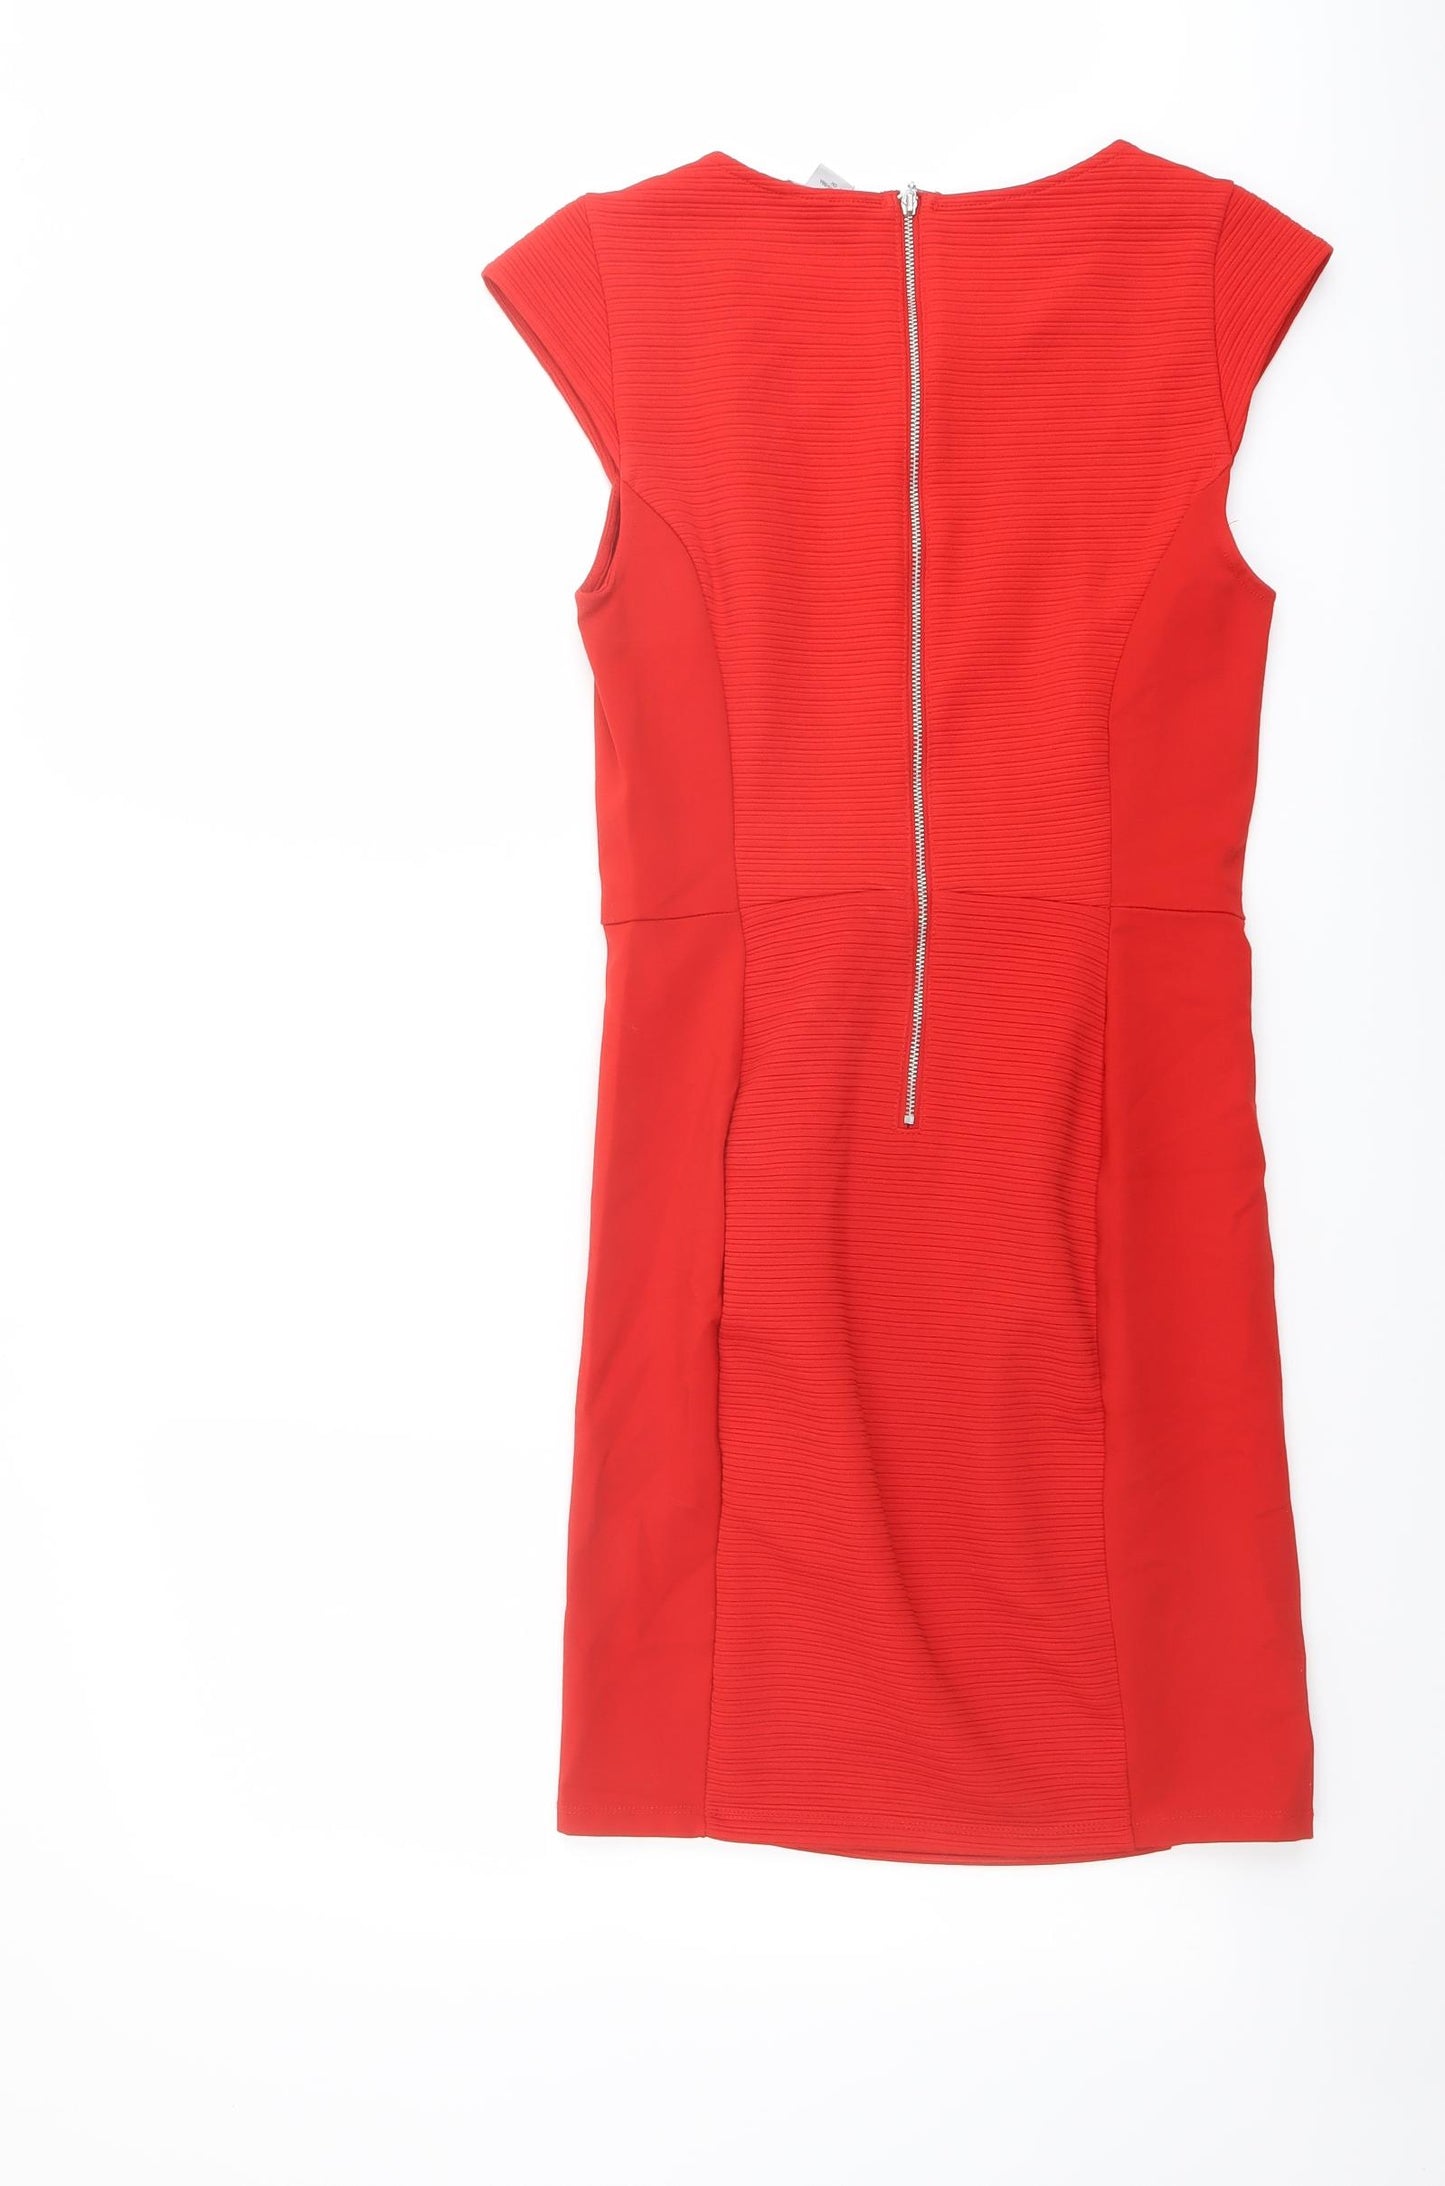 H&M Womens Red Viscose Pencil Dress Size S Boat Neck Zip - Cap Sleeve